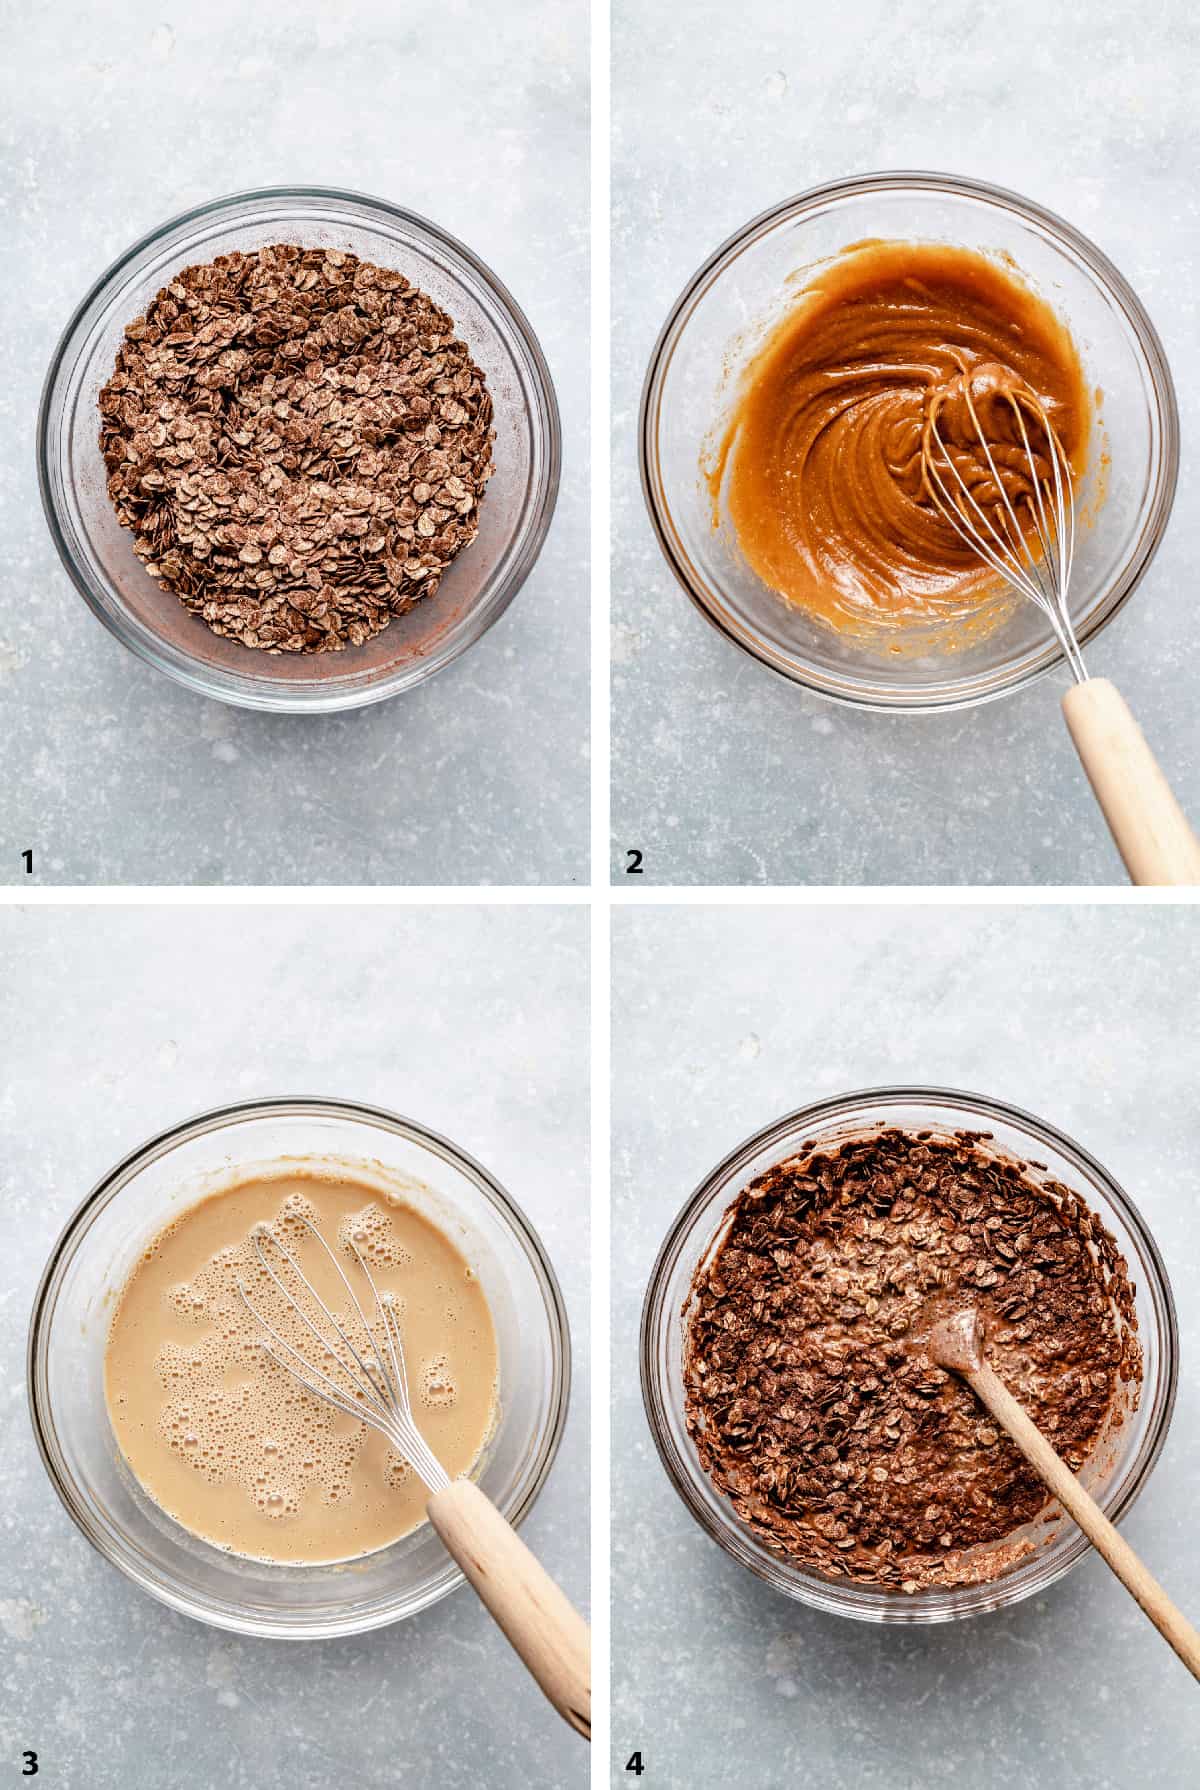 Process of creating the chocolate peanut butter baked oatmeal batter in a bowl.